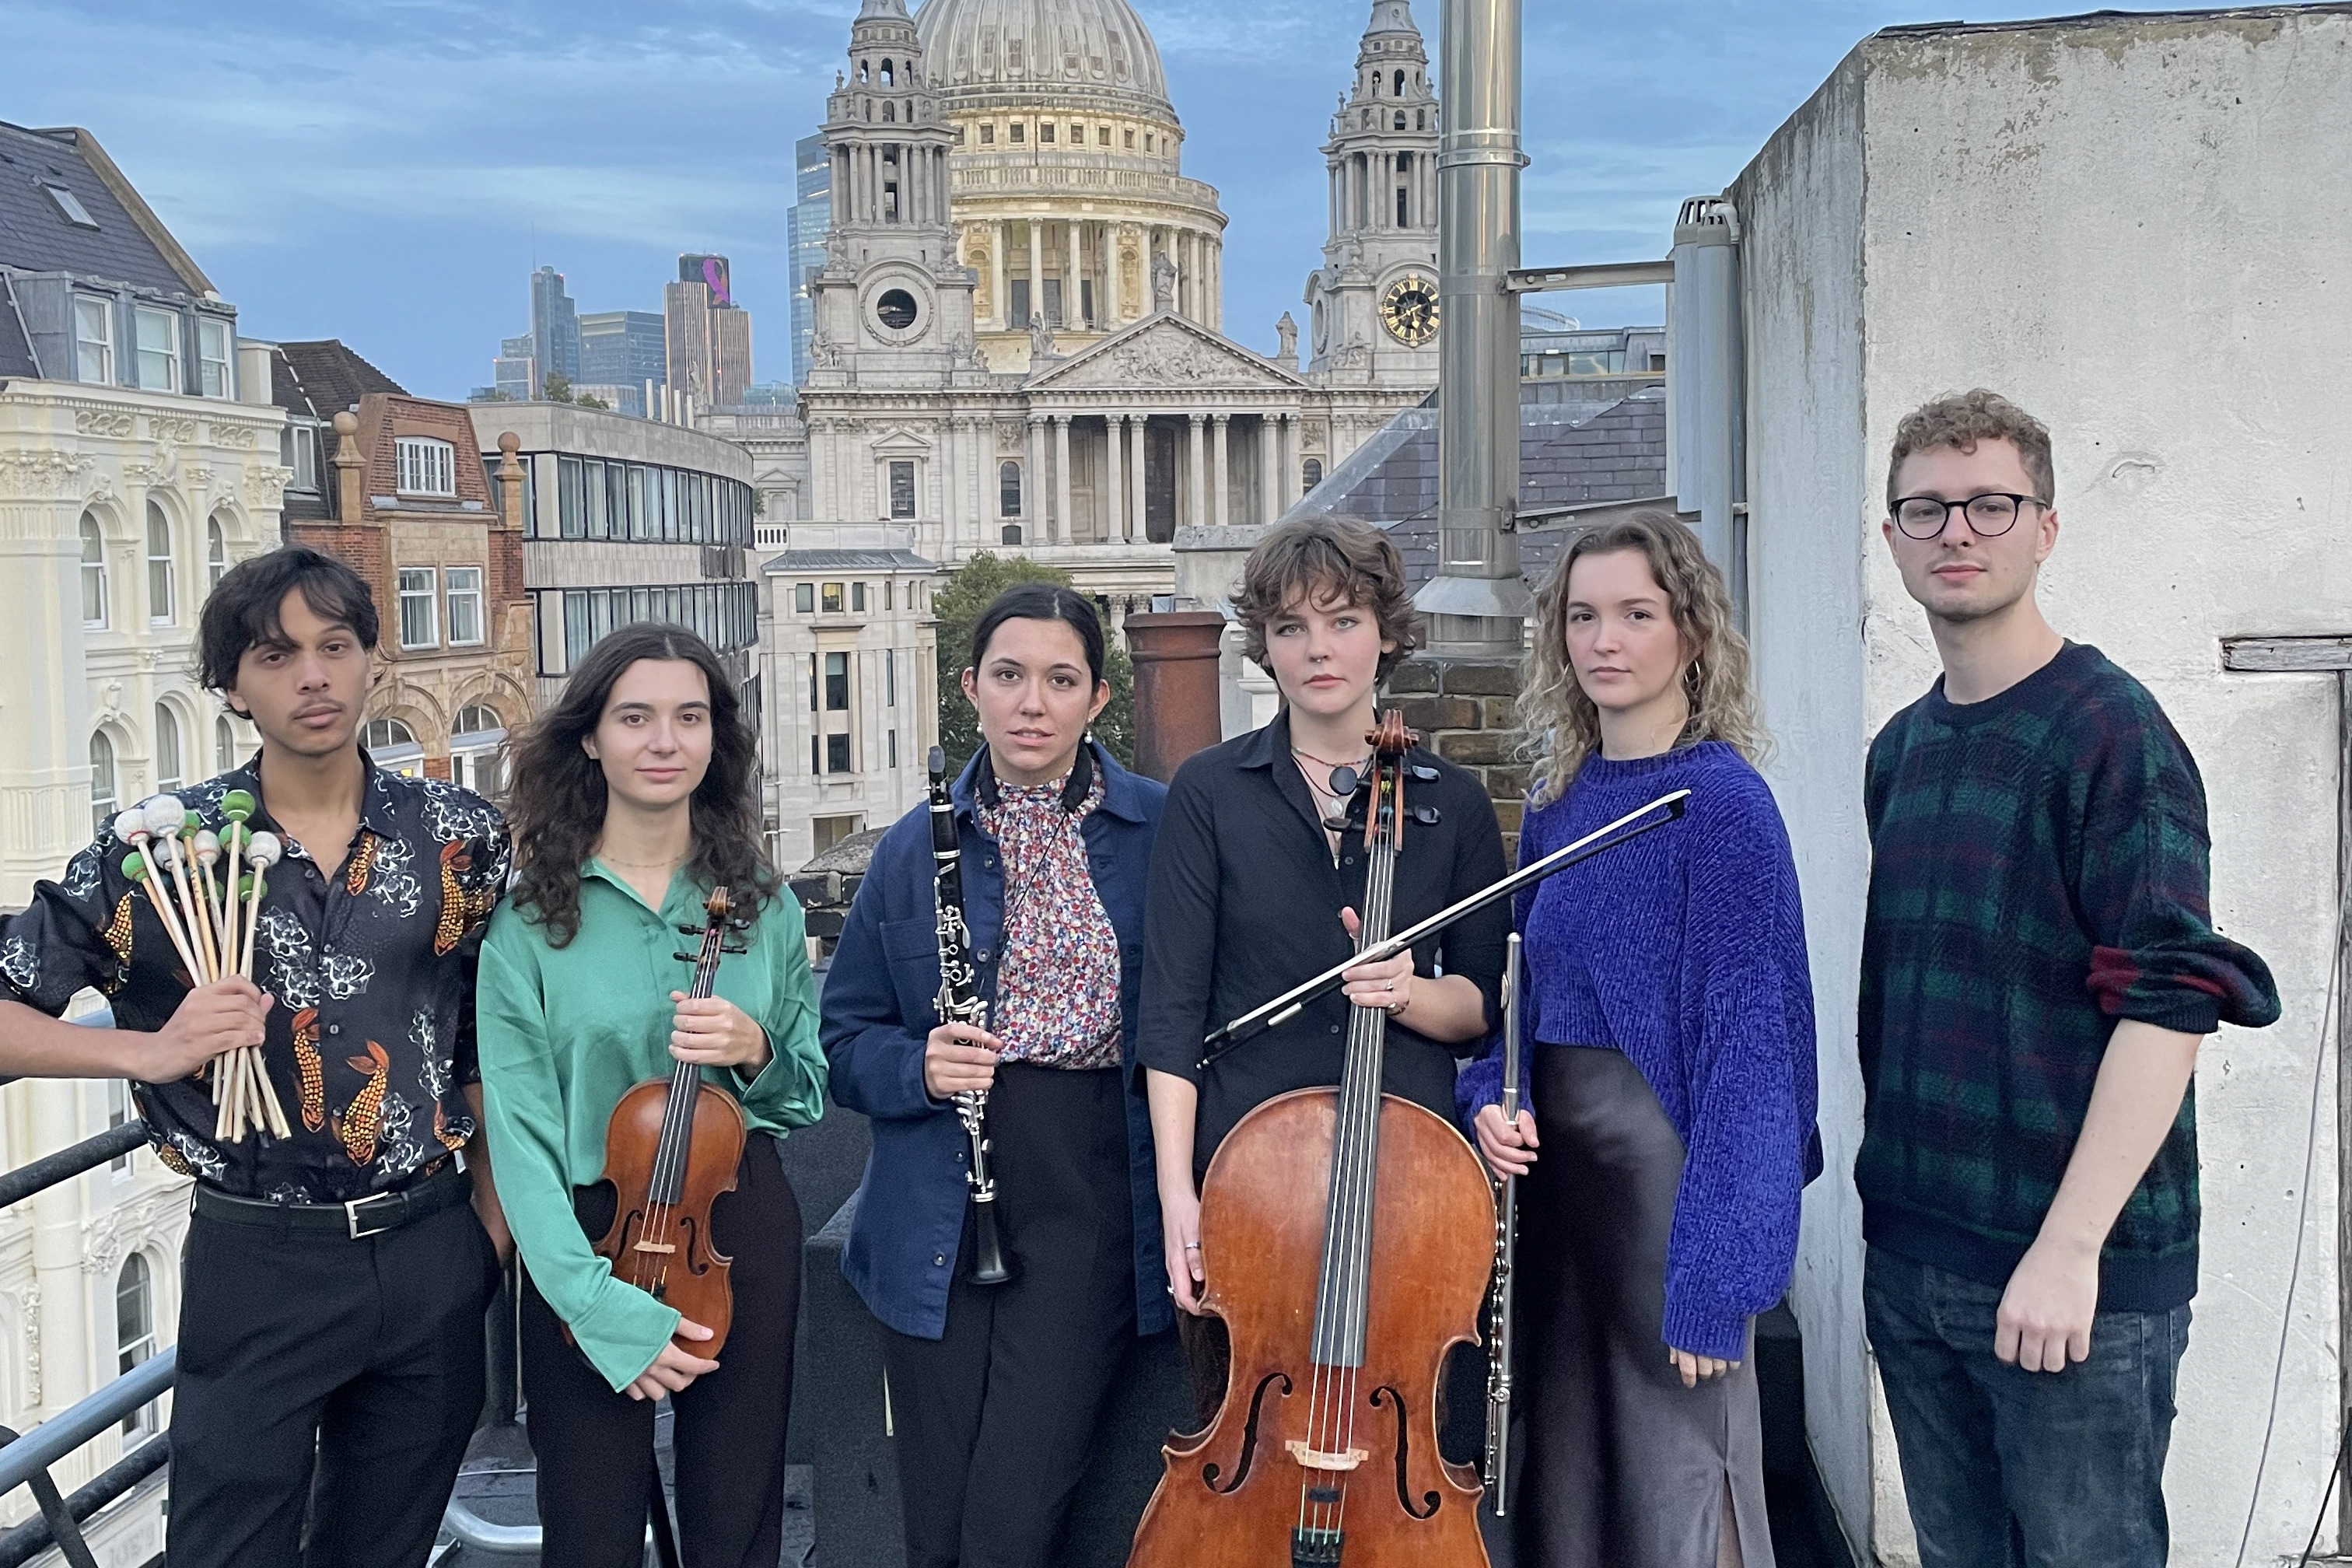 A group of musicians holding percussion and string instruments standing on a London rooftop